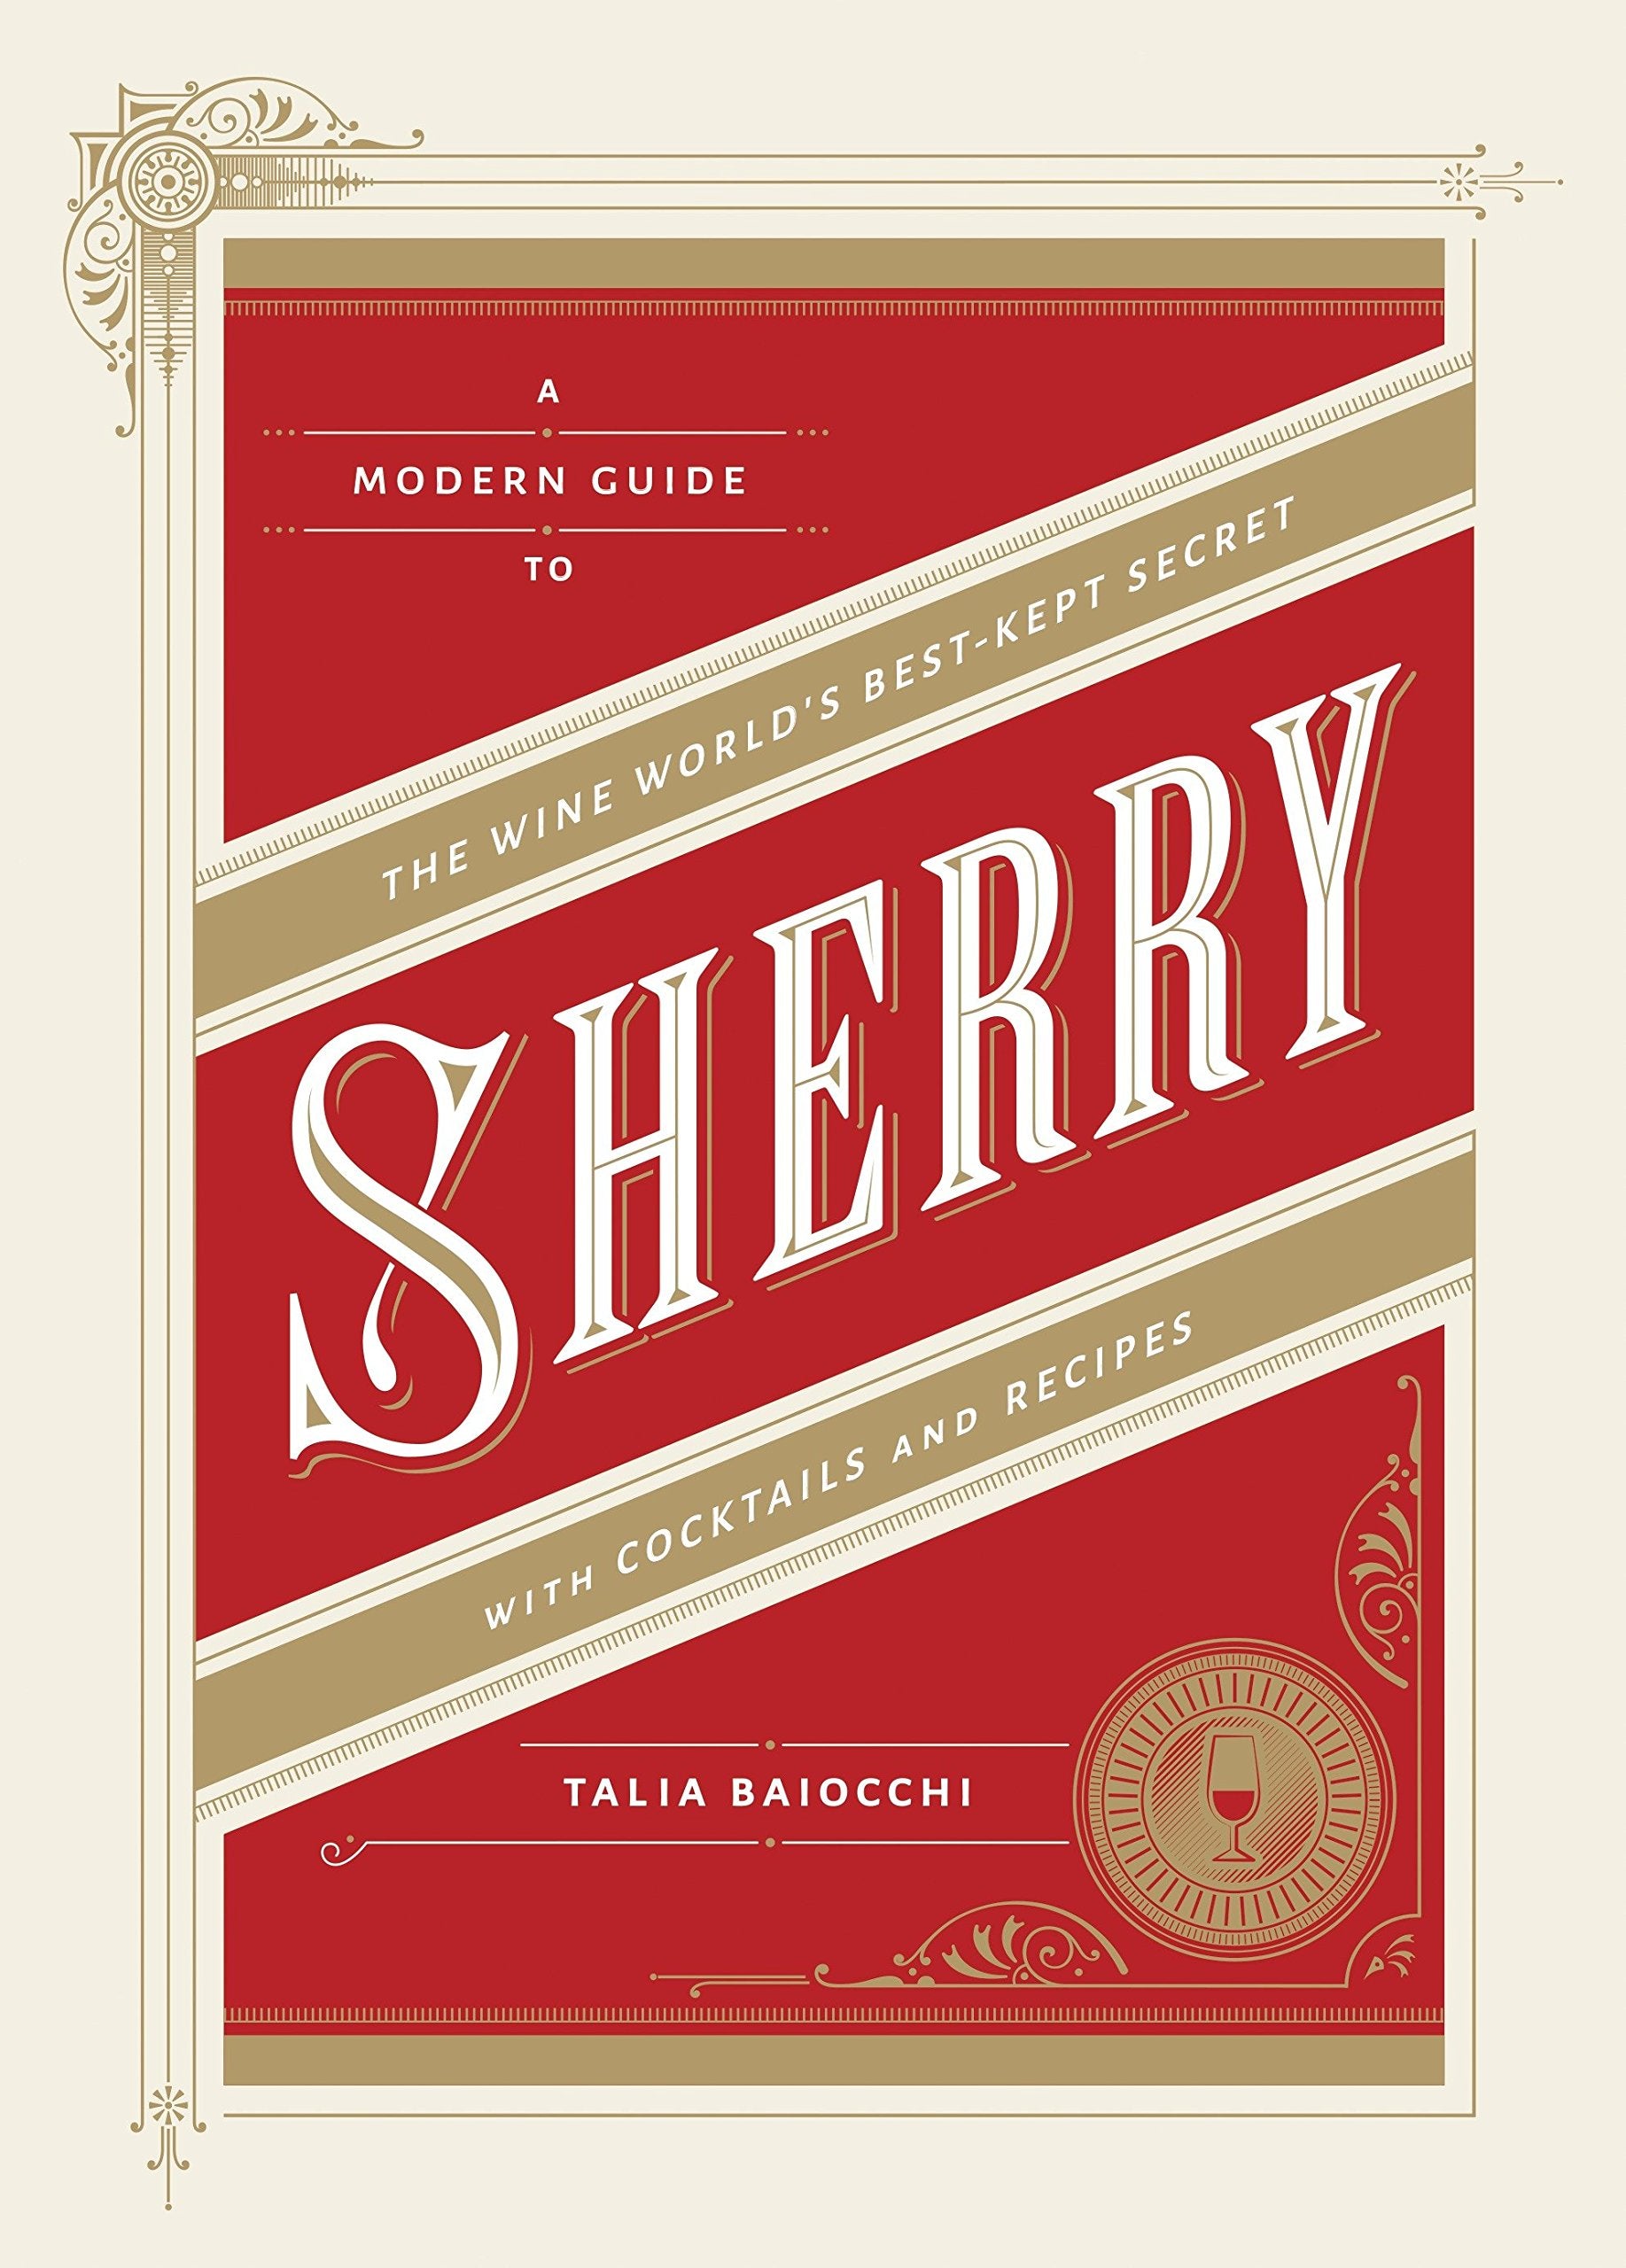 Sherry: A Modern Guide to the Wine World's Best-Kept Secret, with Cocktails and Recipes (Talia Baiocchi)